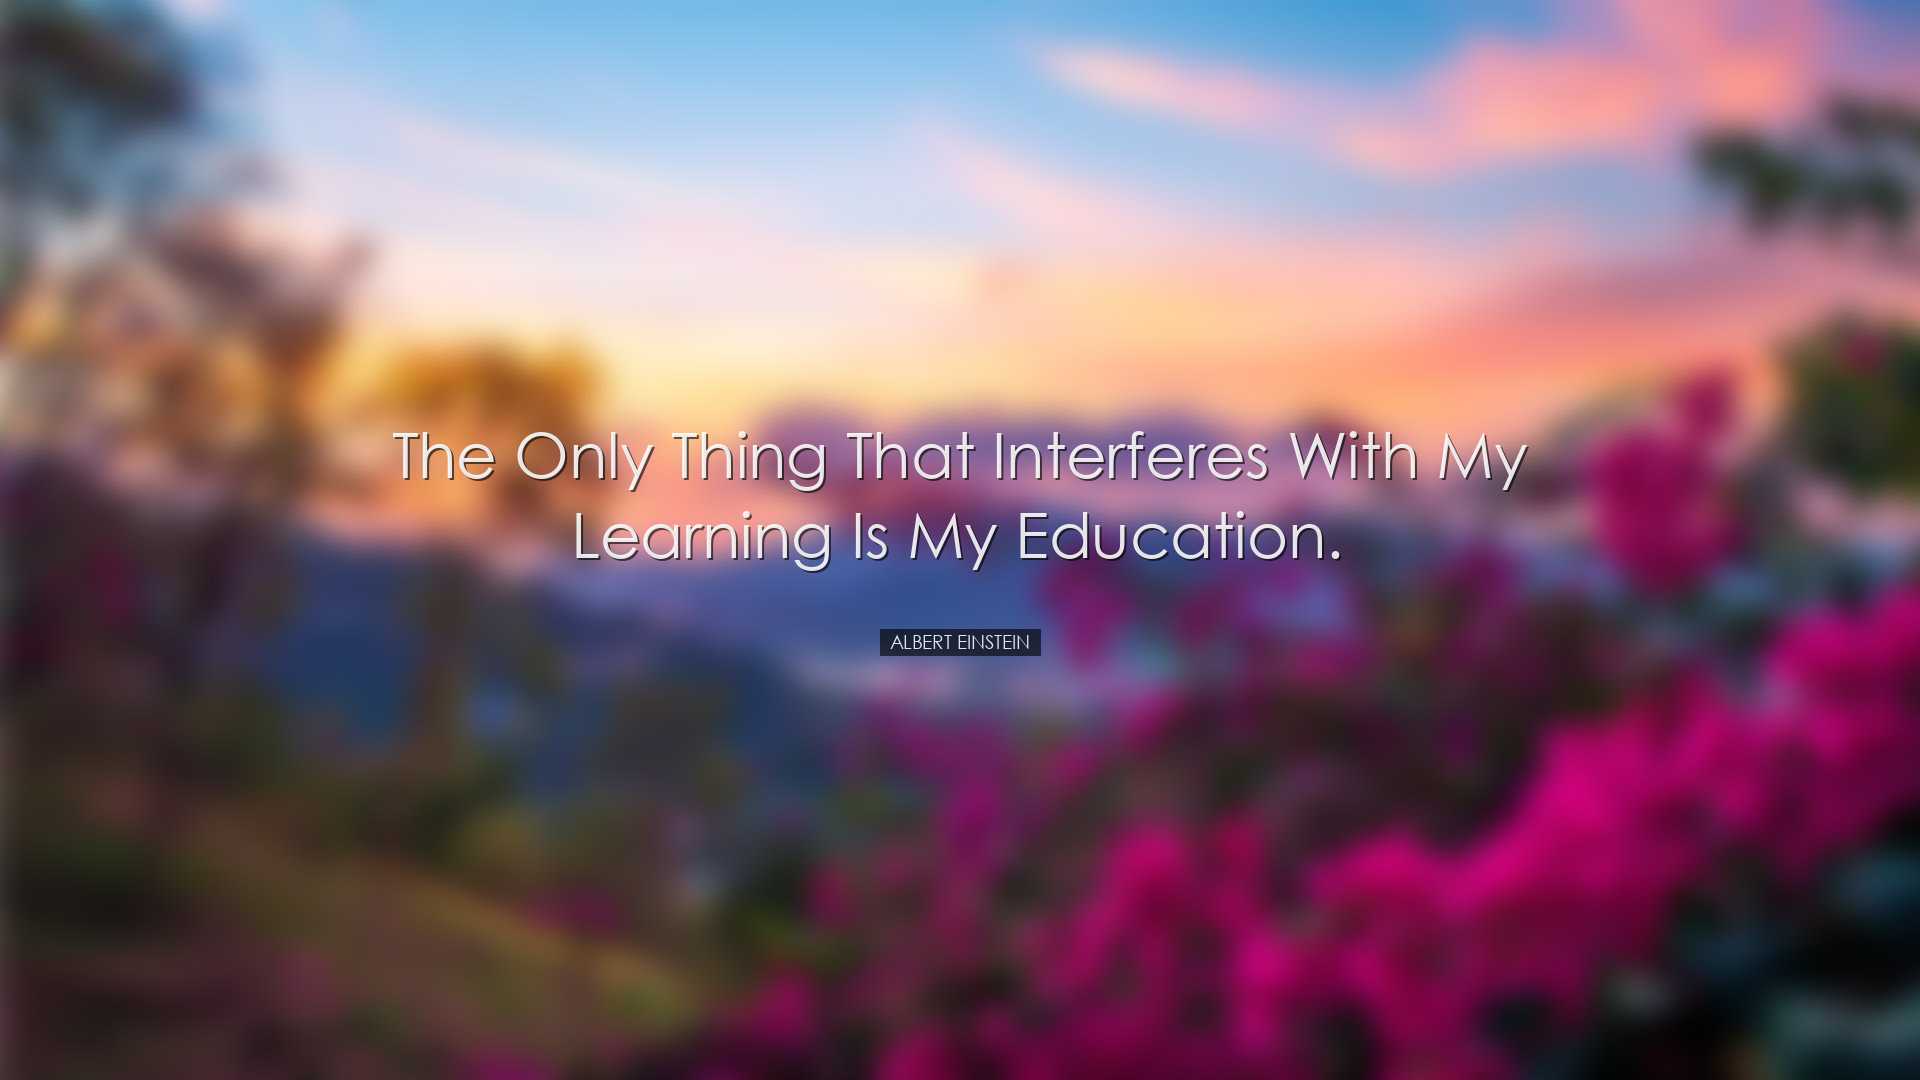 The only thing that interferes with my learning is my education. -